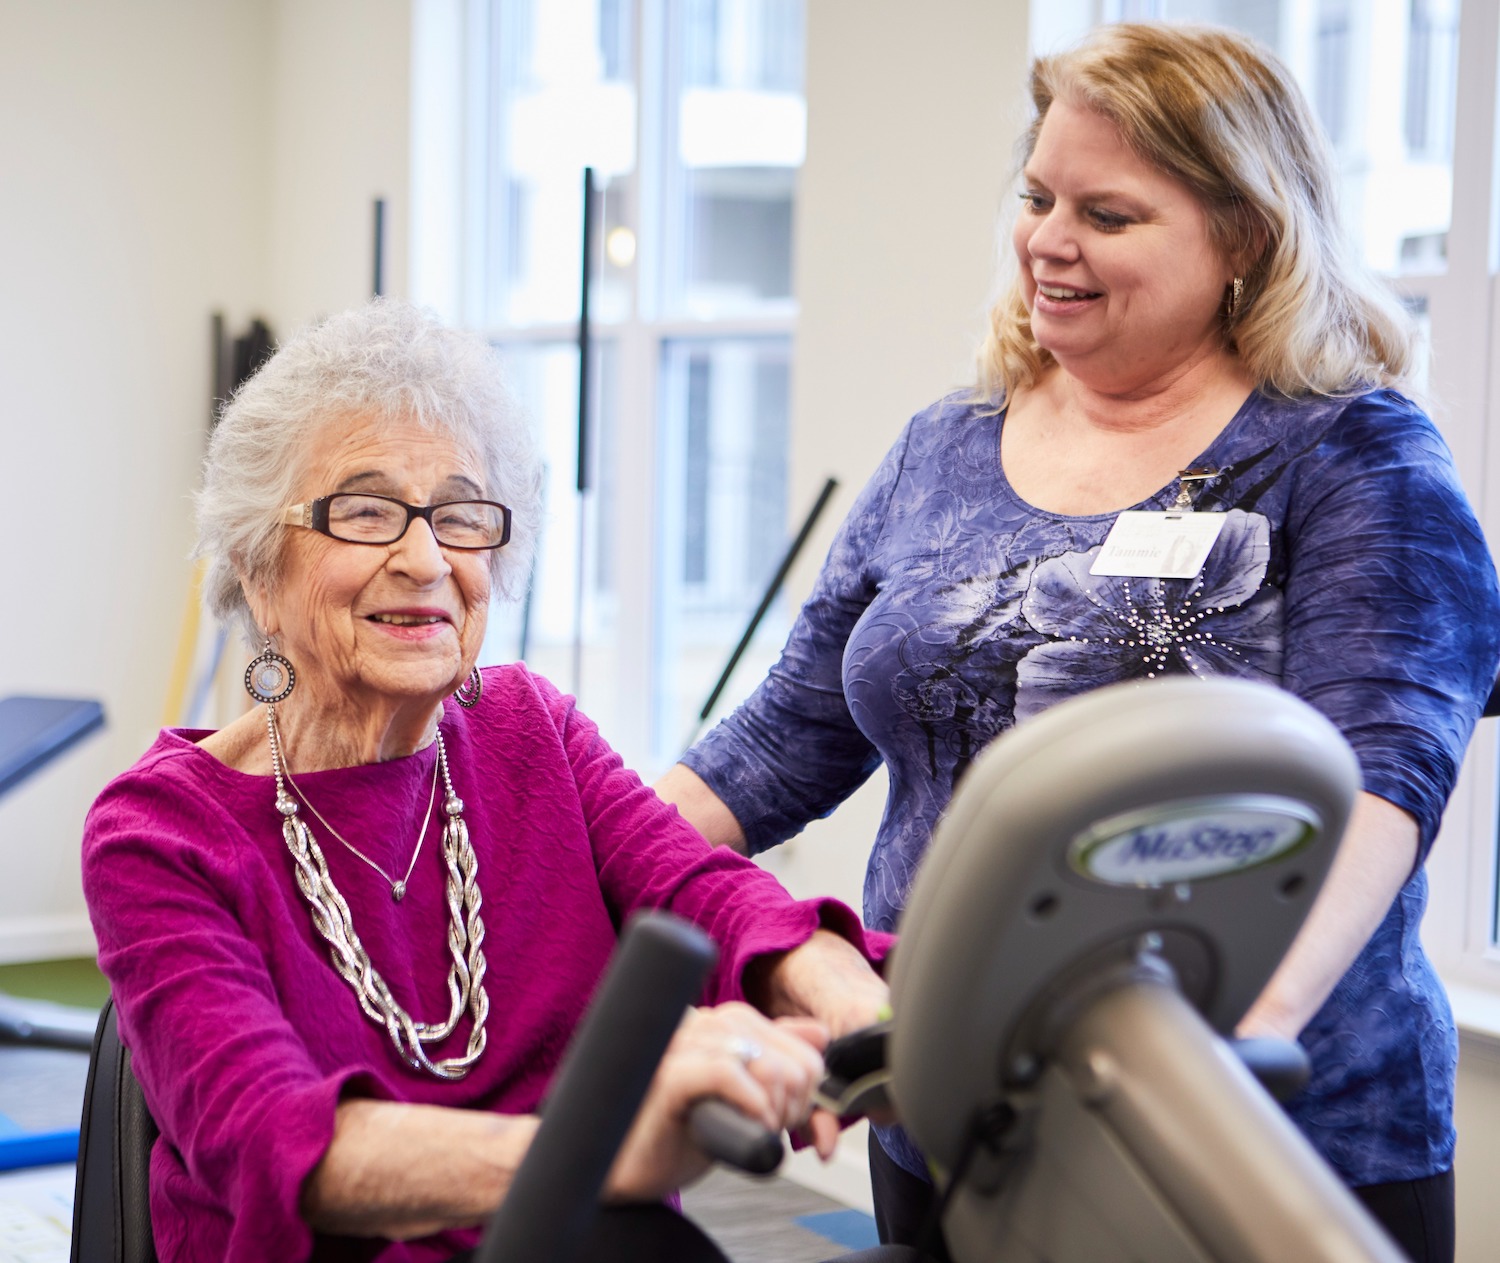 A senior resident working out with the help of a team member